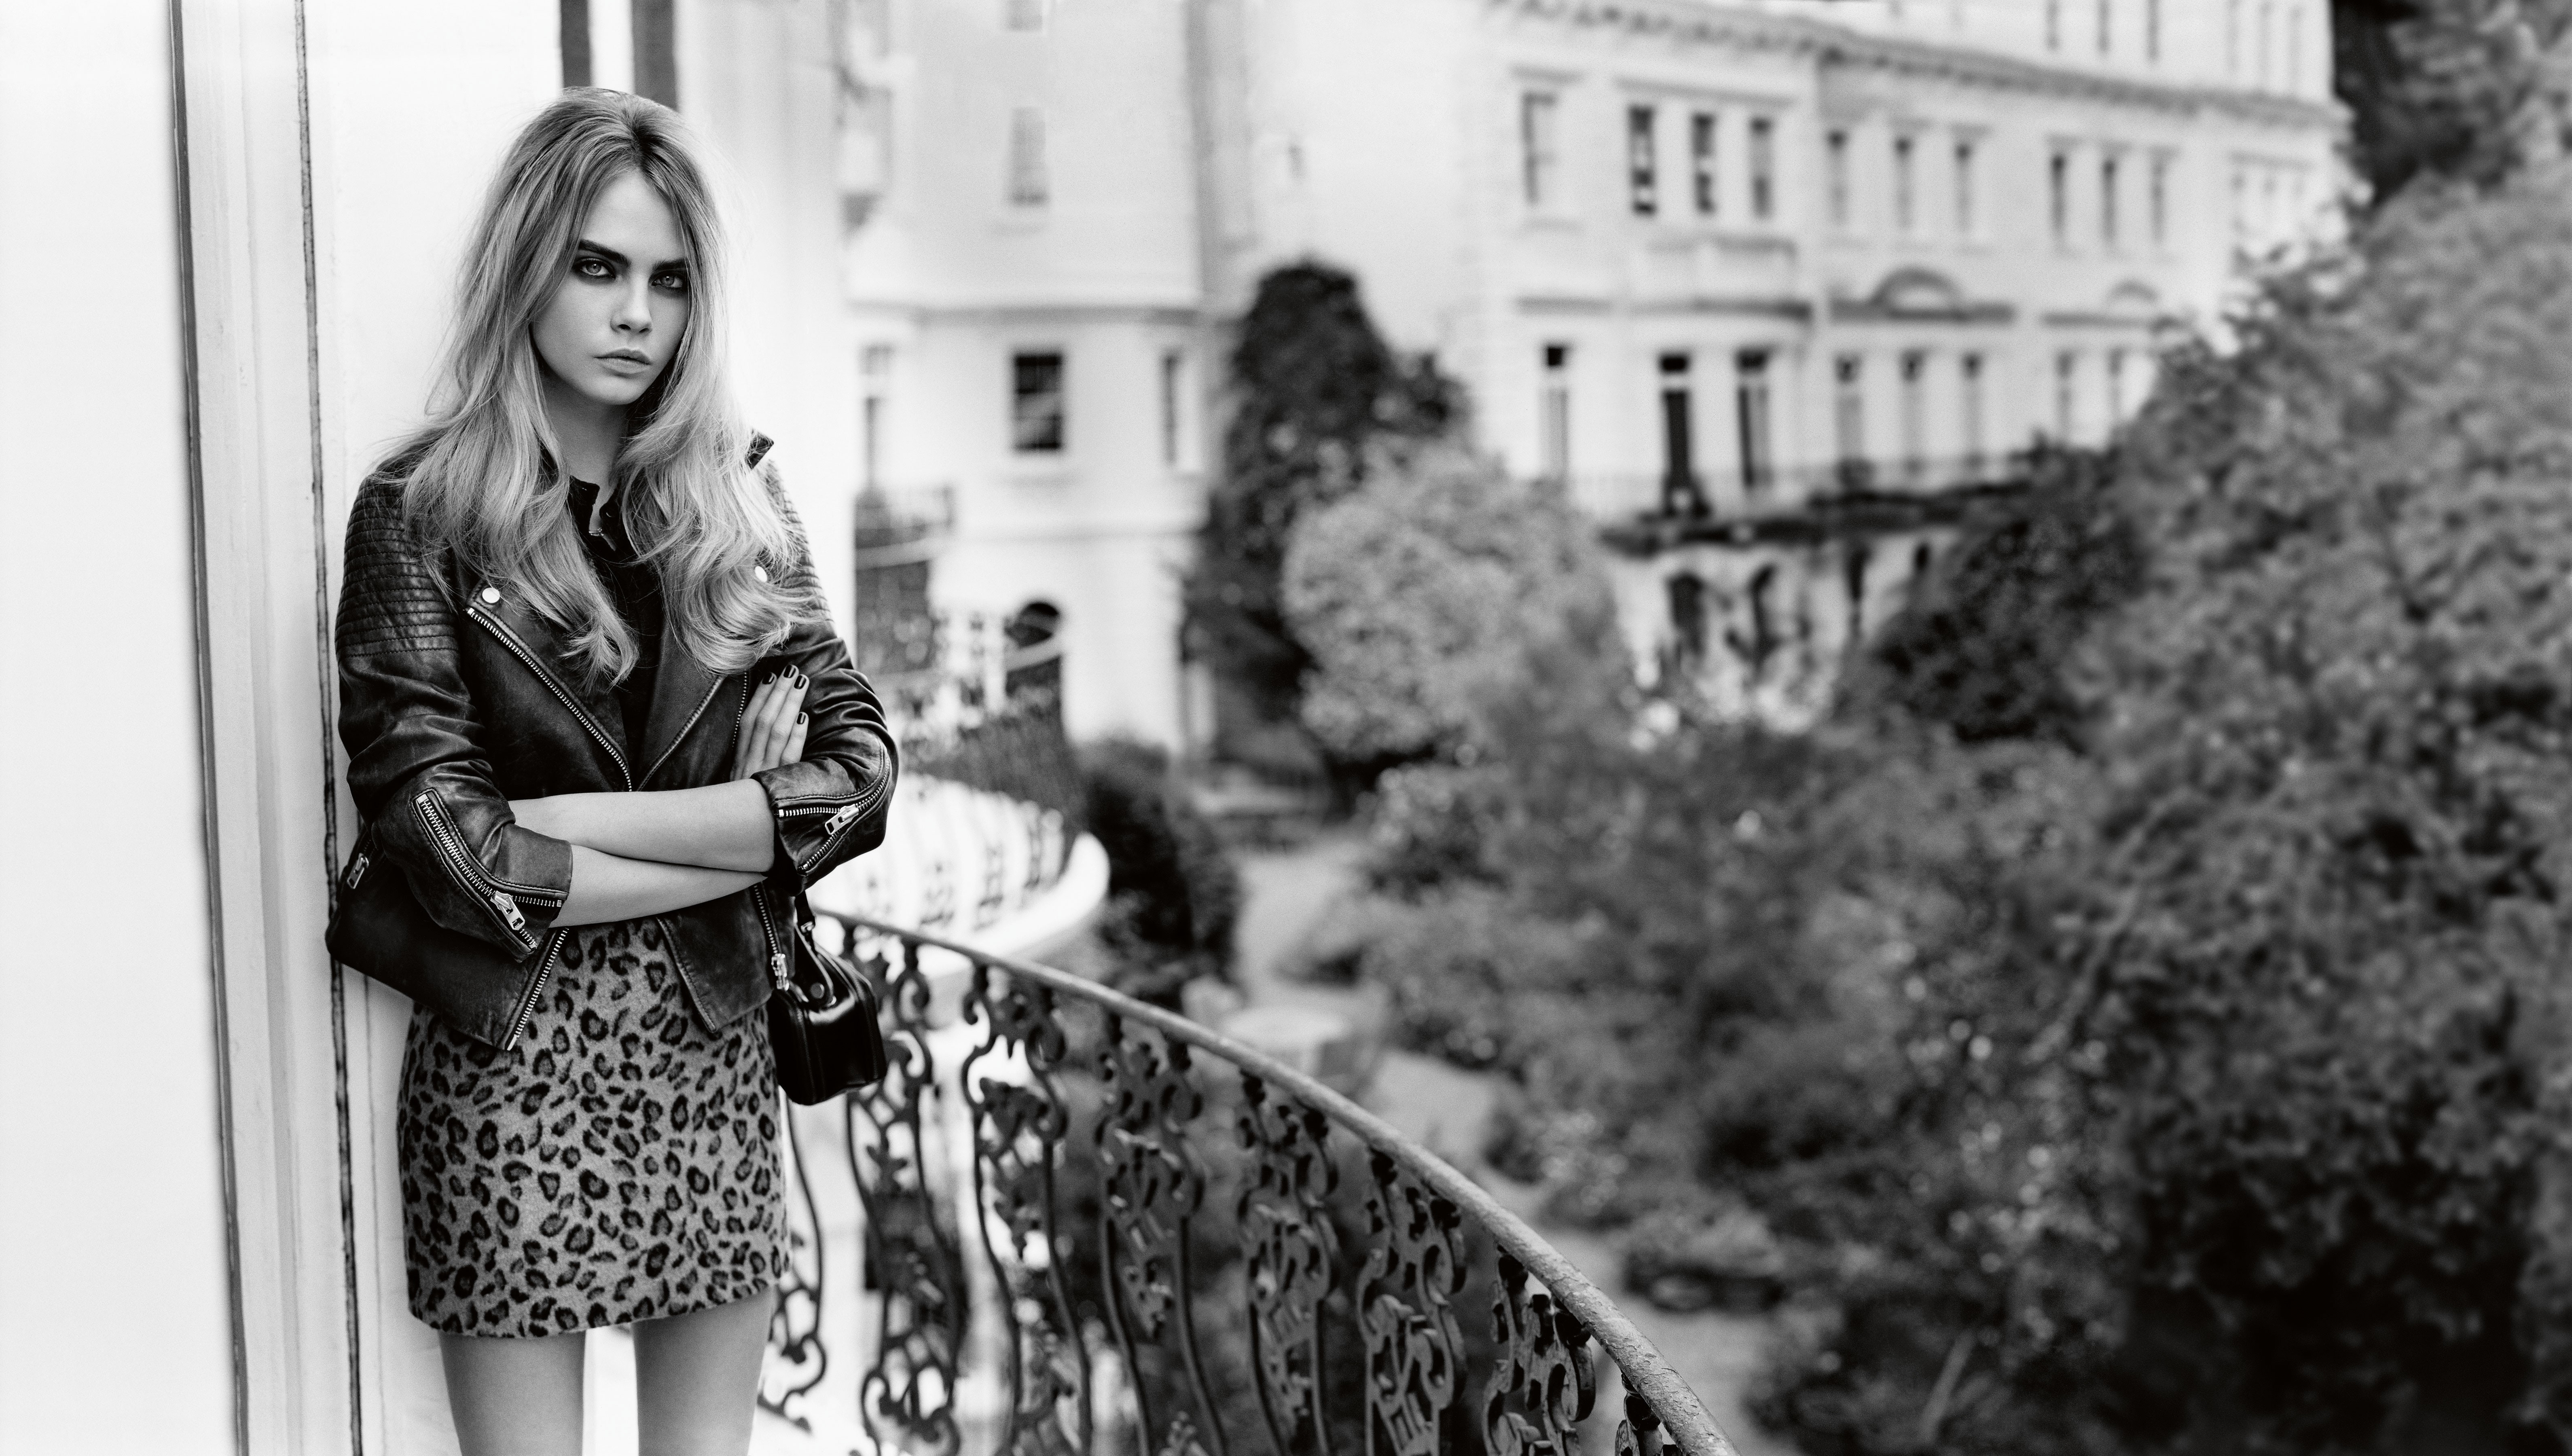 Women Celebrity Cara Delevingne Arms Crossed Blonde Animal Print Leather Jackets Smoky Eyes Looking  6359x3600